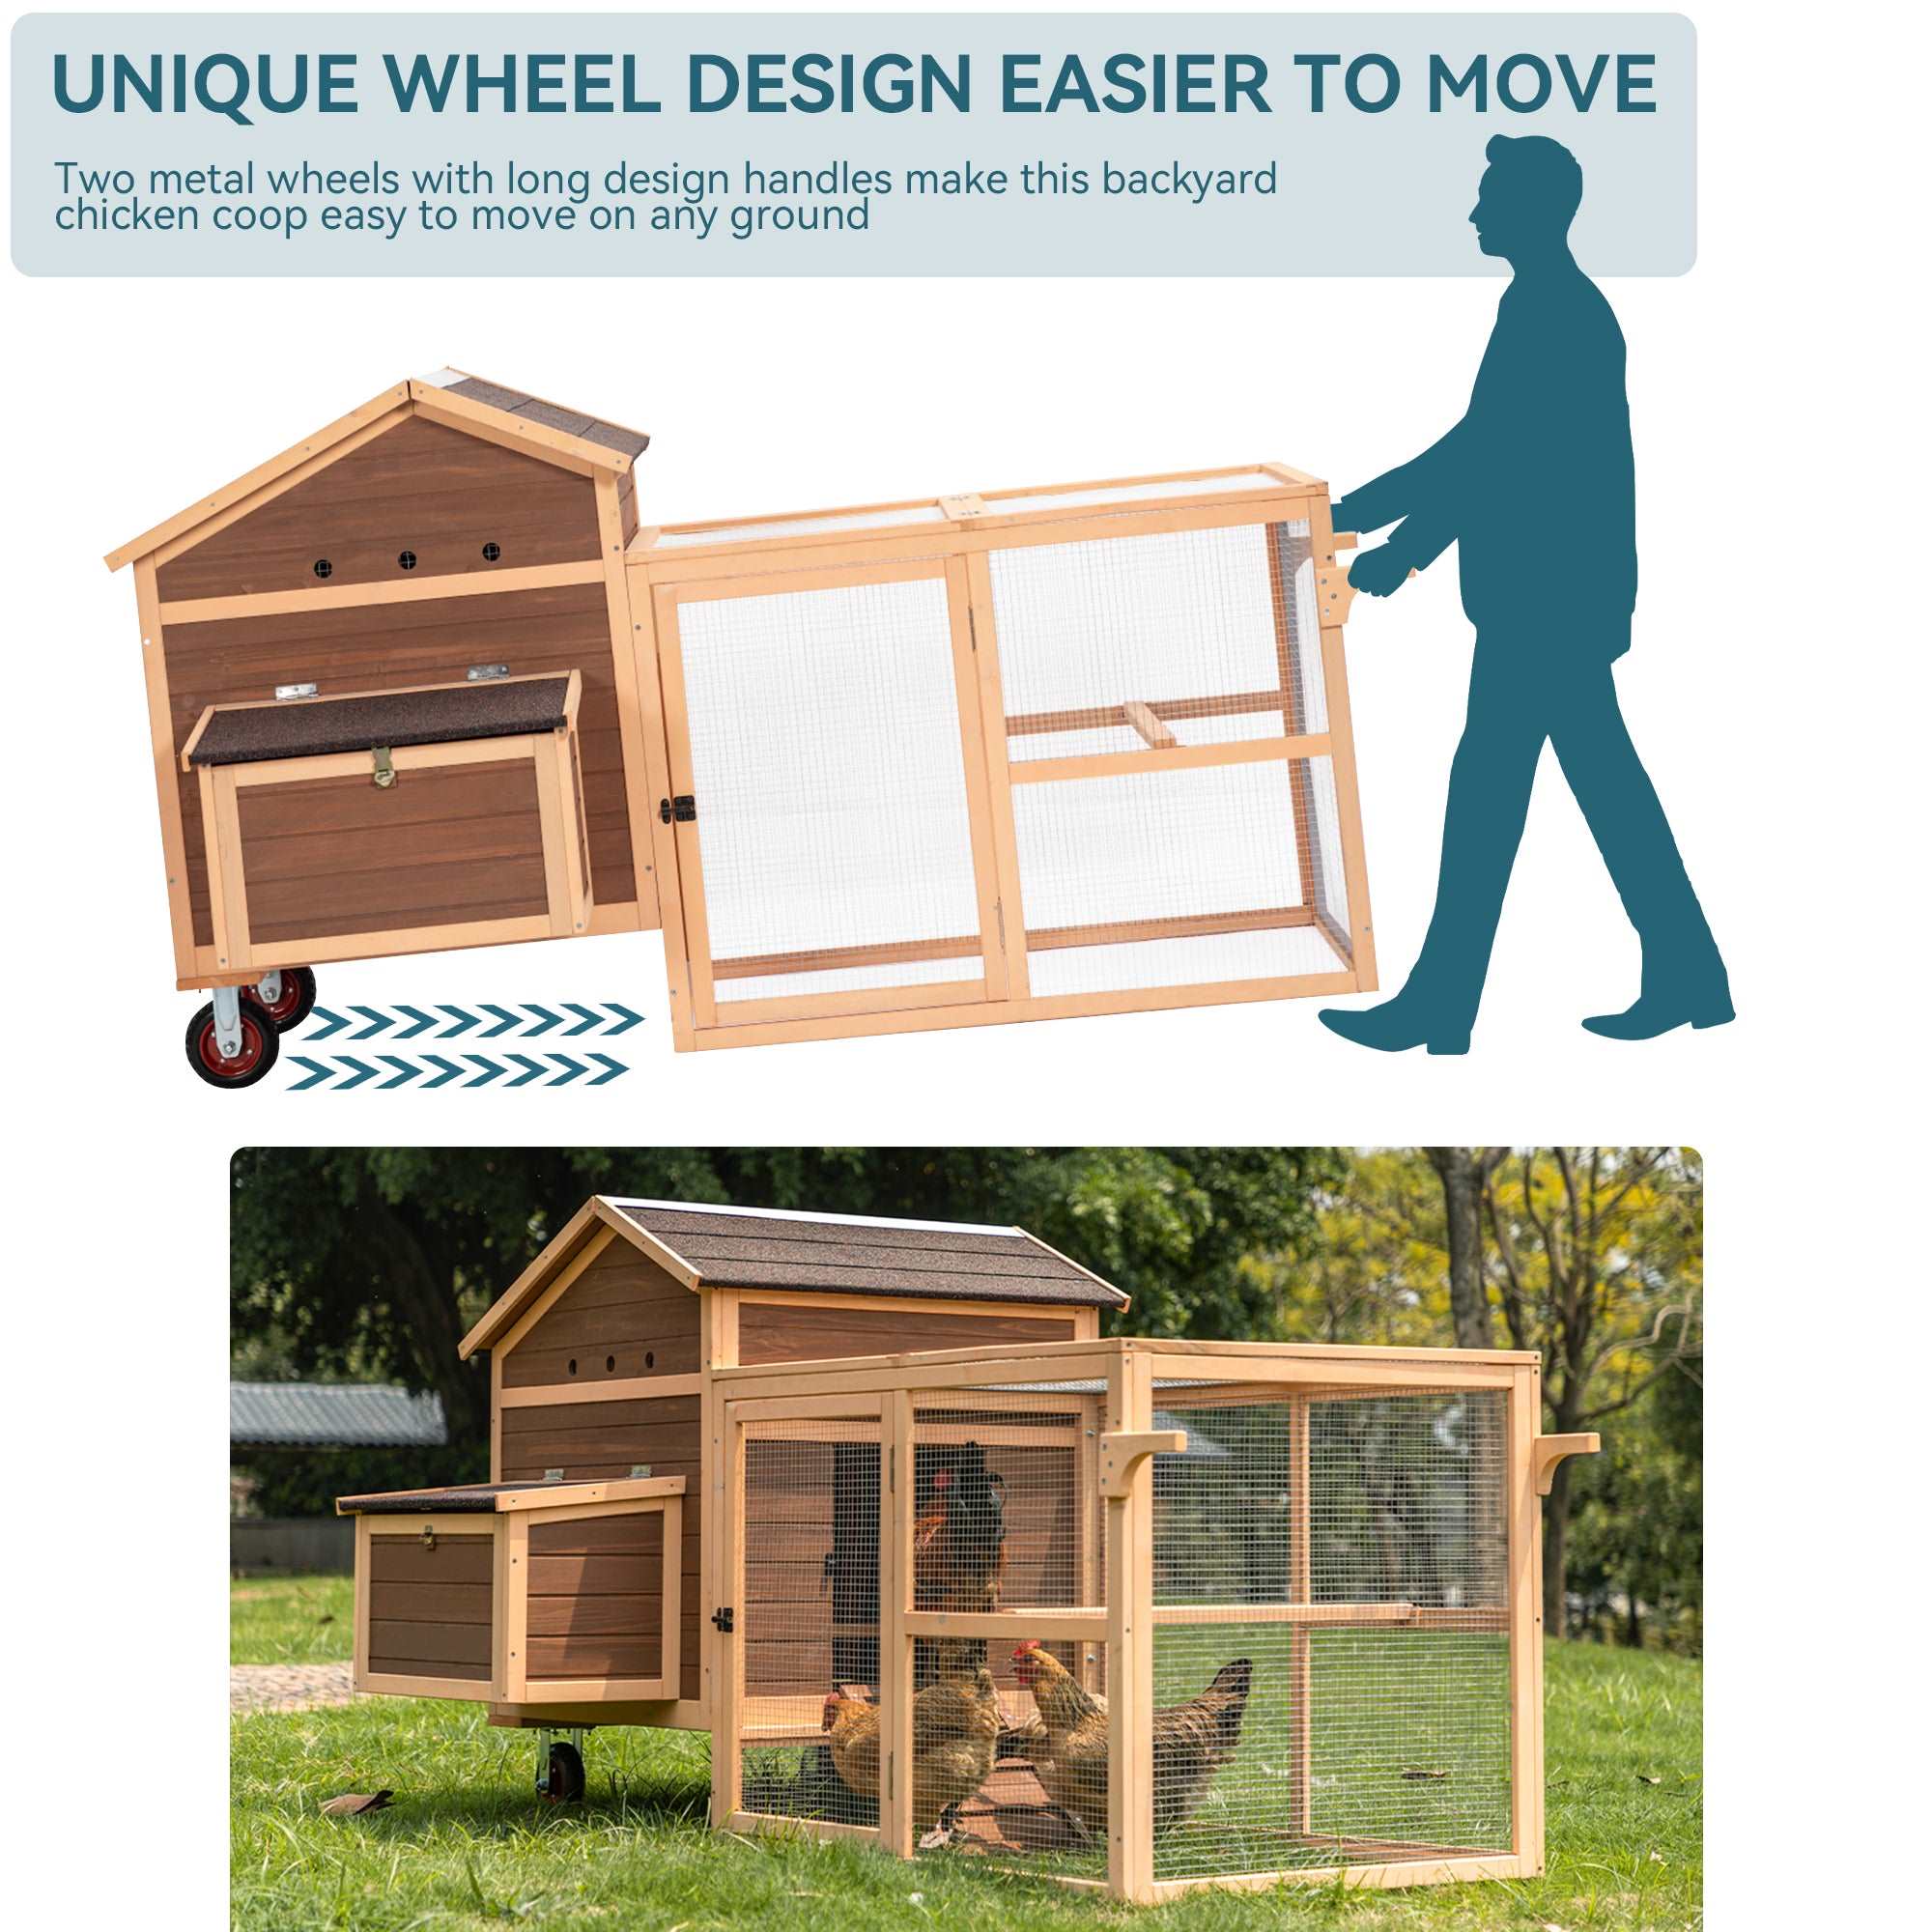 petsfit-large-chicken-coop-tractor-81-hen-house-outdoor-waterproof-poultry-cage-with-nesting-box-wheels-5-access-areas-pull-out-tray-for-easy-cleaning-05